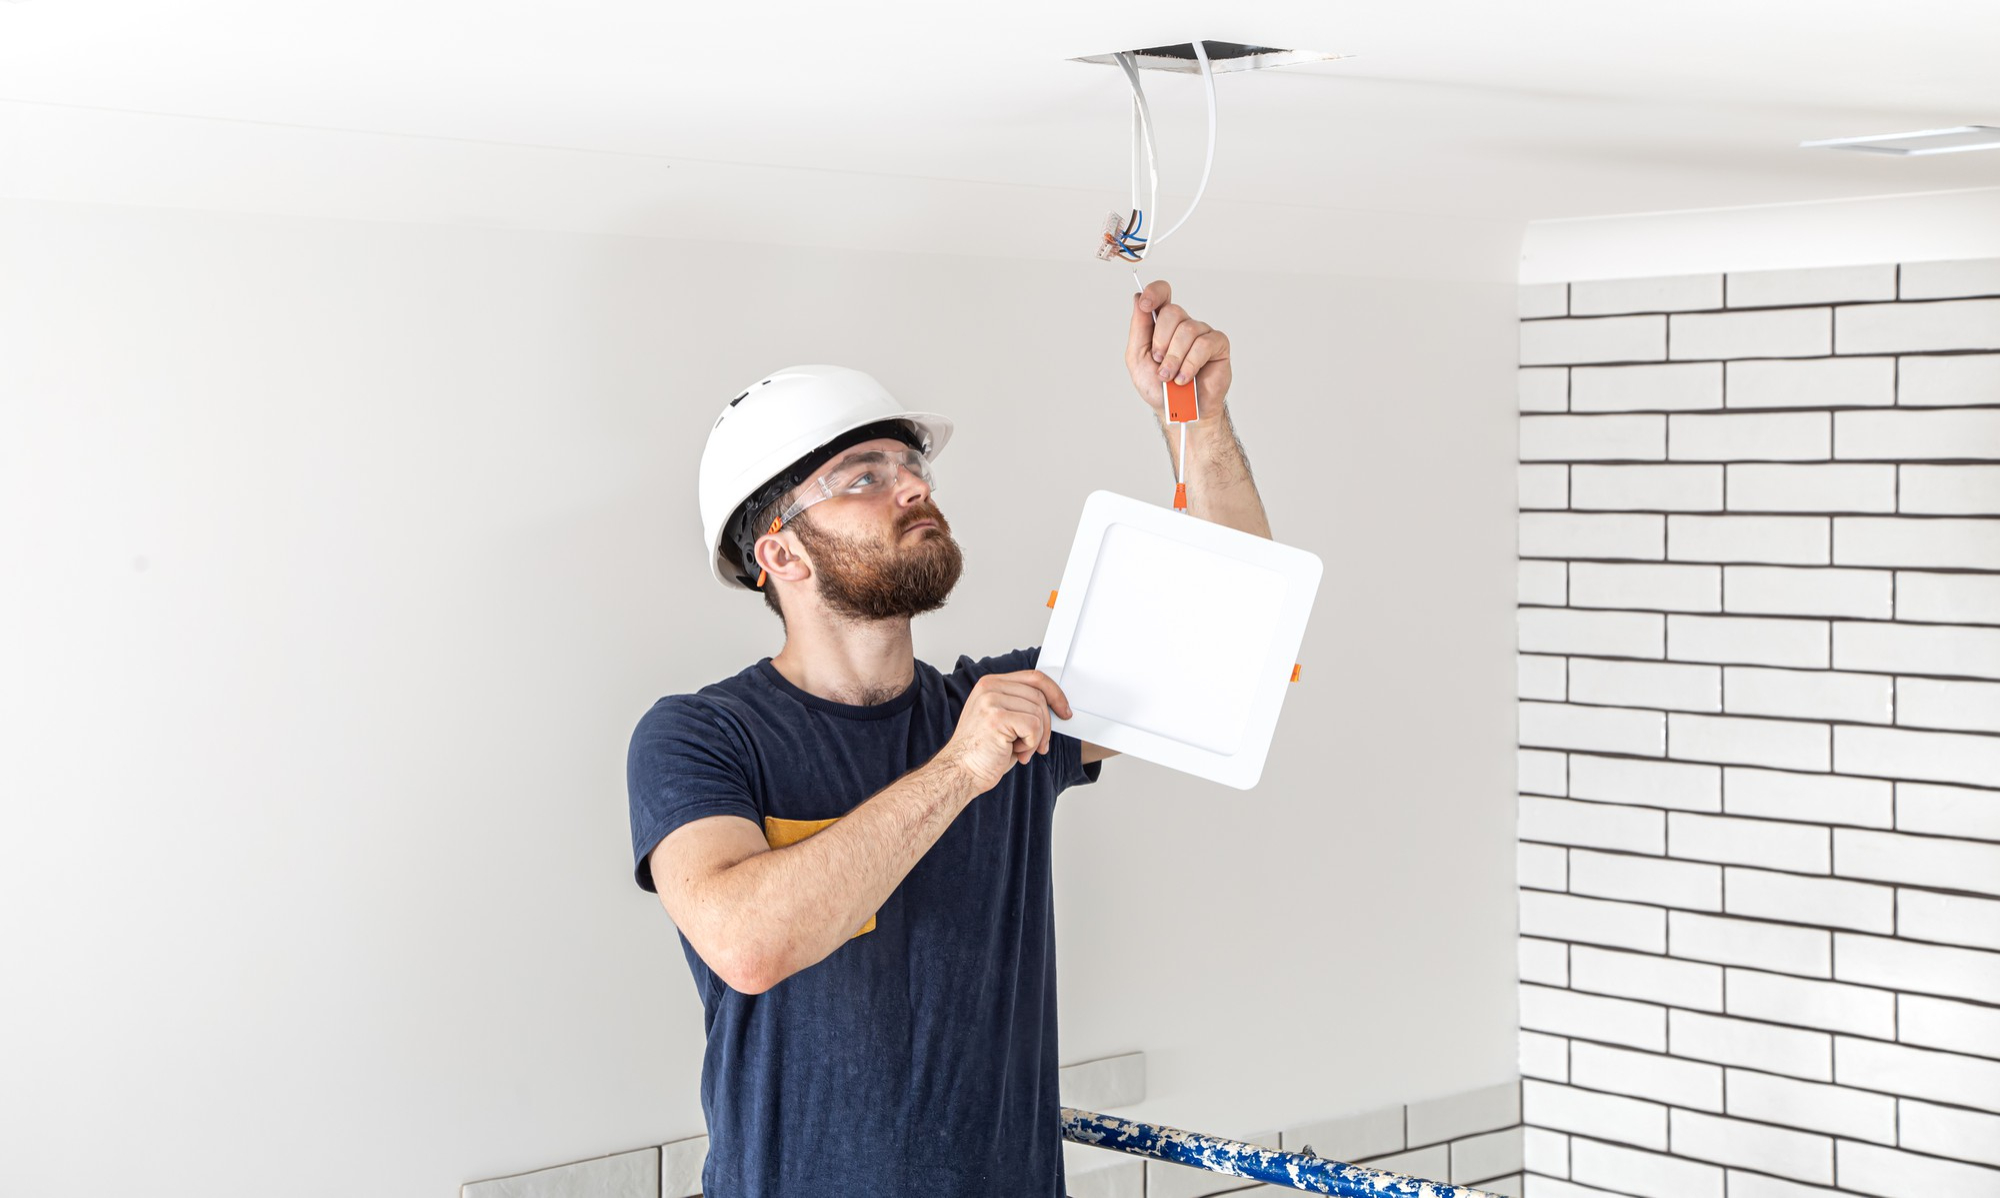 A New Construction Isn’t Finished Without an Electrician